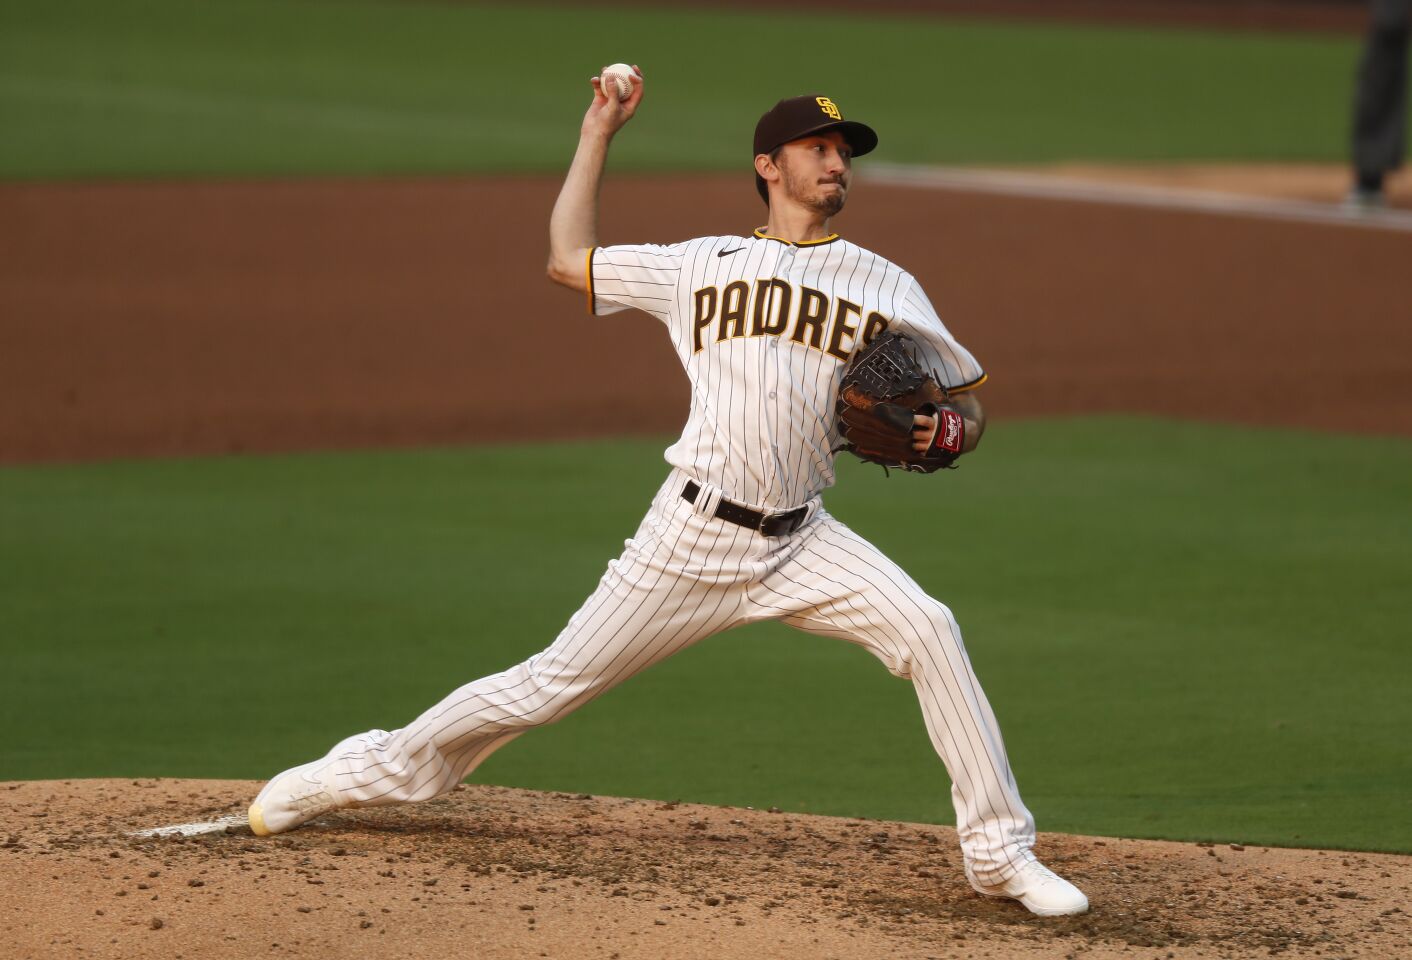 San Diego Padres pitcher Zach Davies throws against the Colorado Rockies on Wednesday, Sept. 9, 2020 in San Diego, CA.